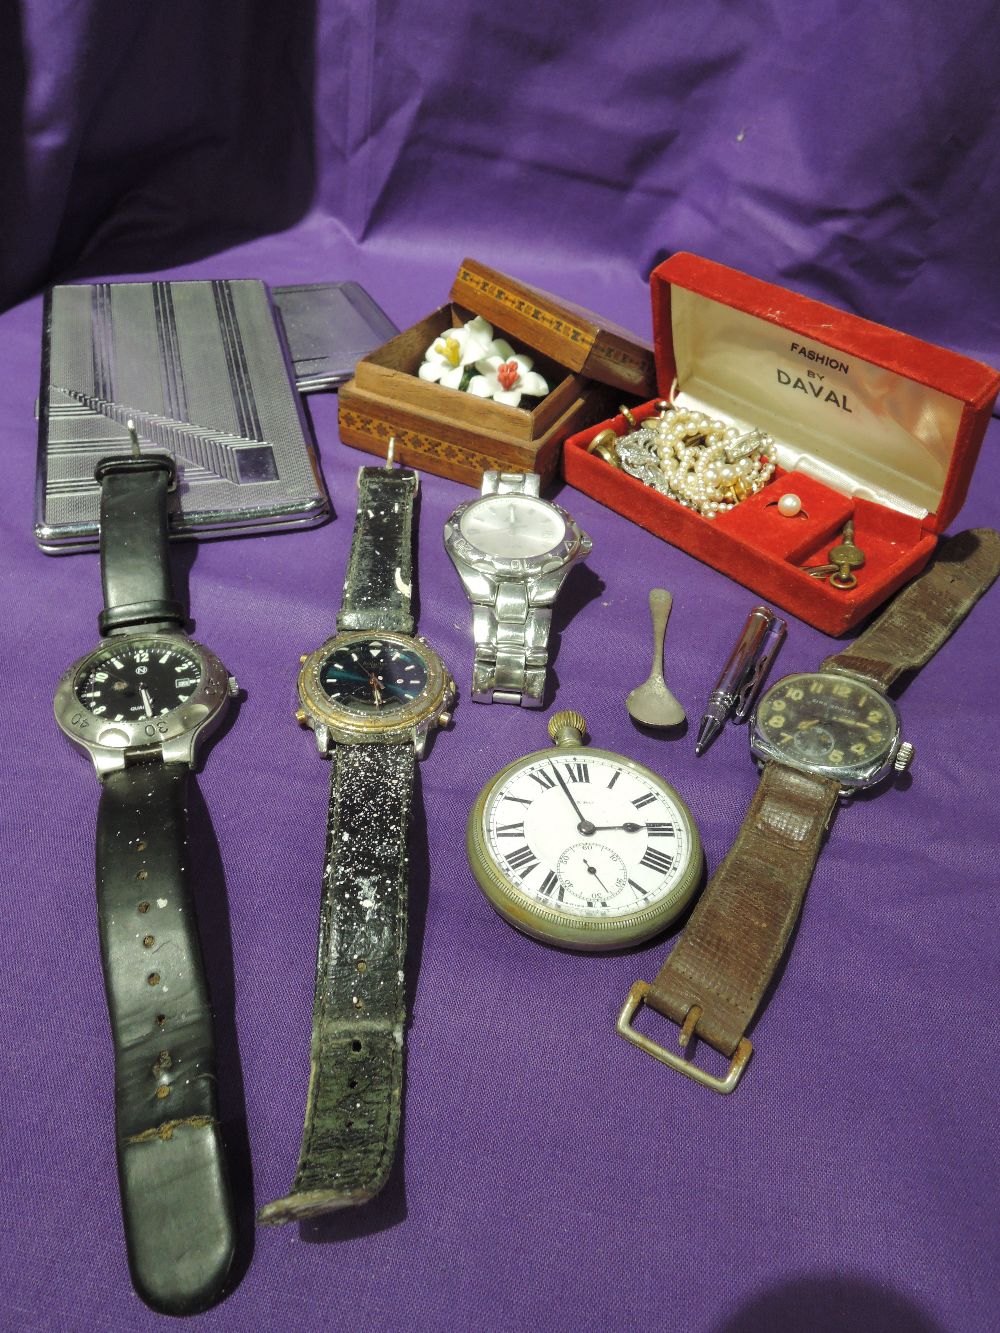 A sm,all selection of gents wrist watches including Siro sports, two cigarette cases, a pocket watch